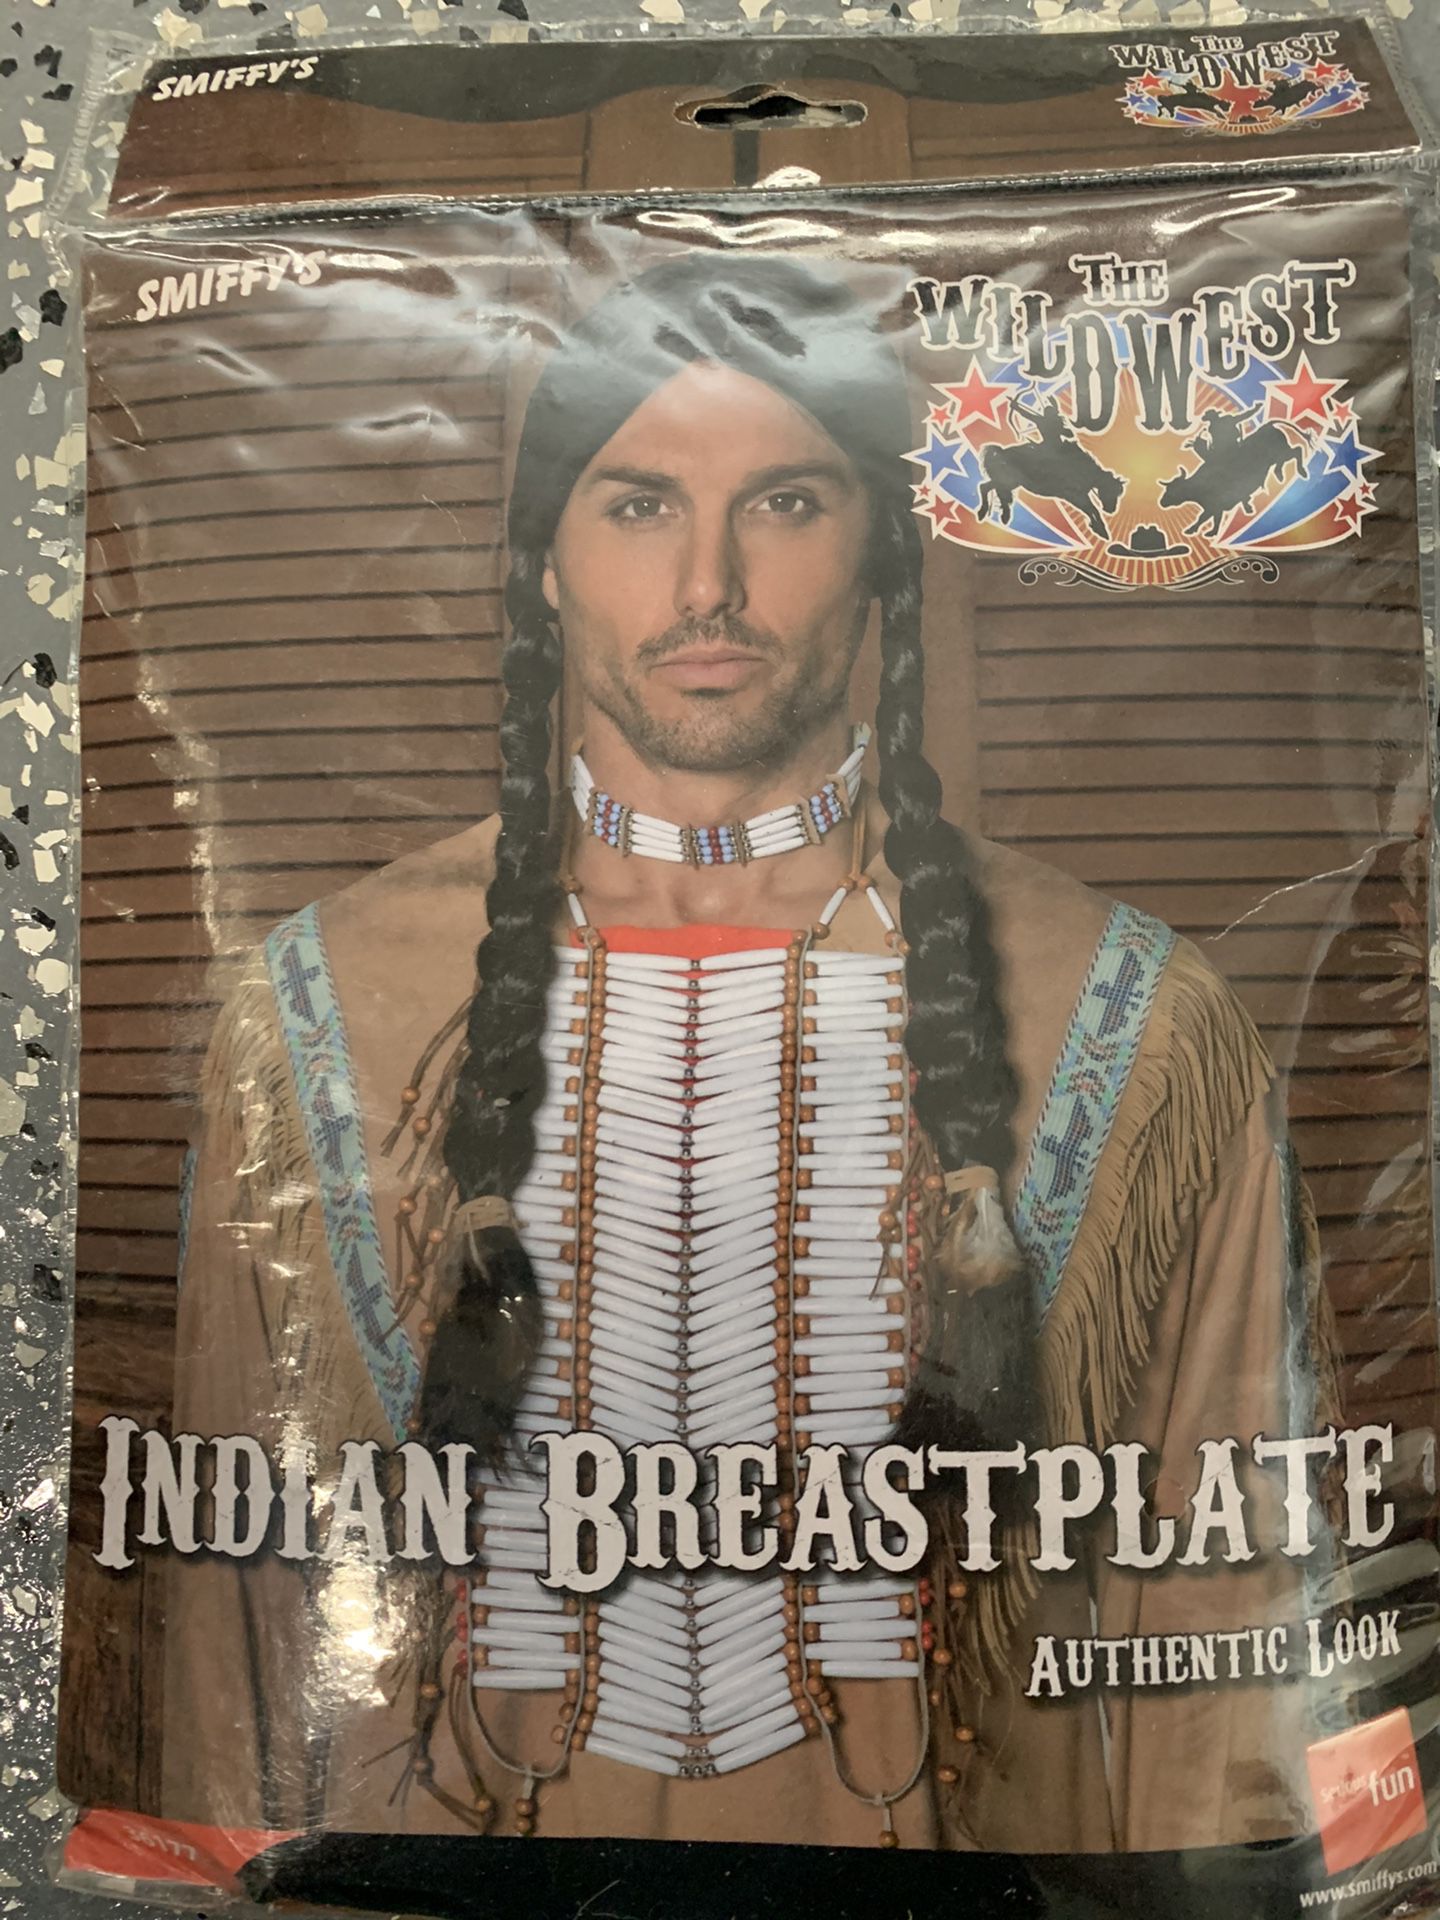 Indian breastplate